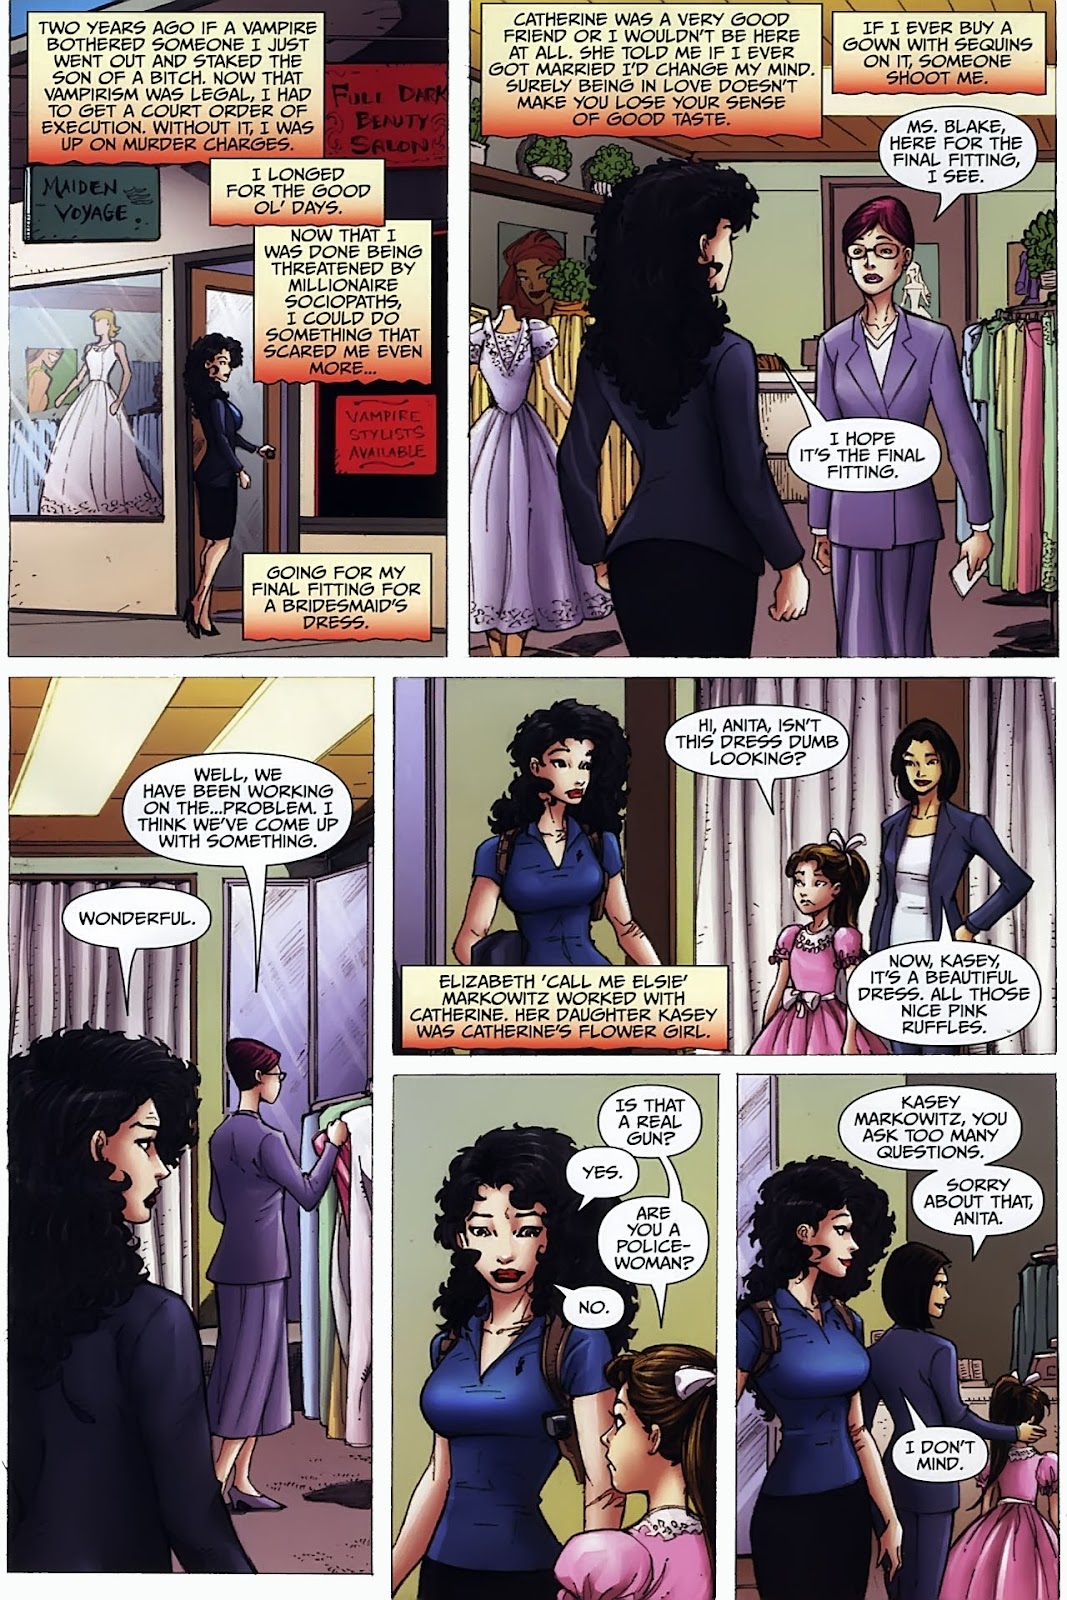 Anita Blake: The Laughing Corpse - Book One issue 1 - Page 12